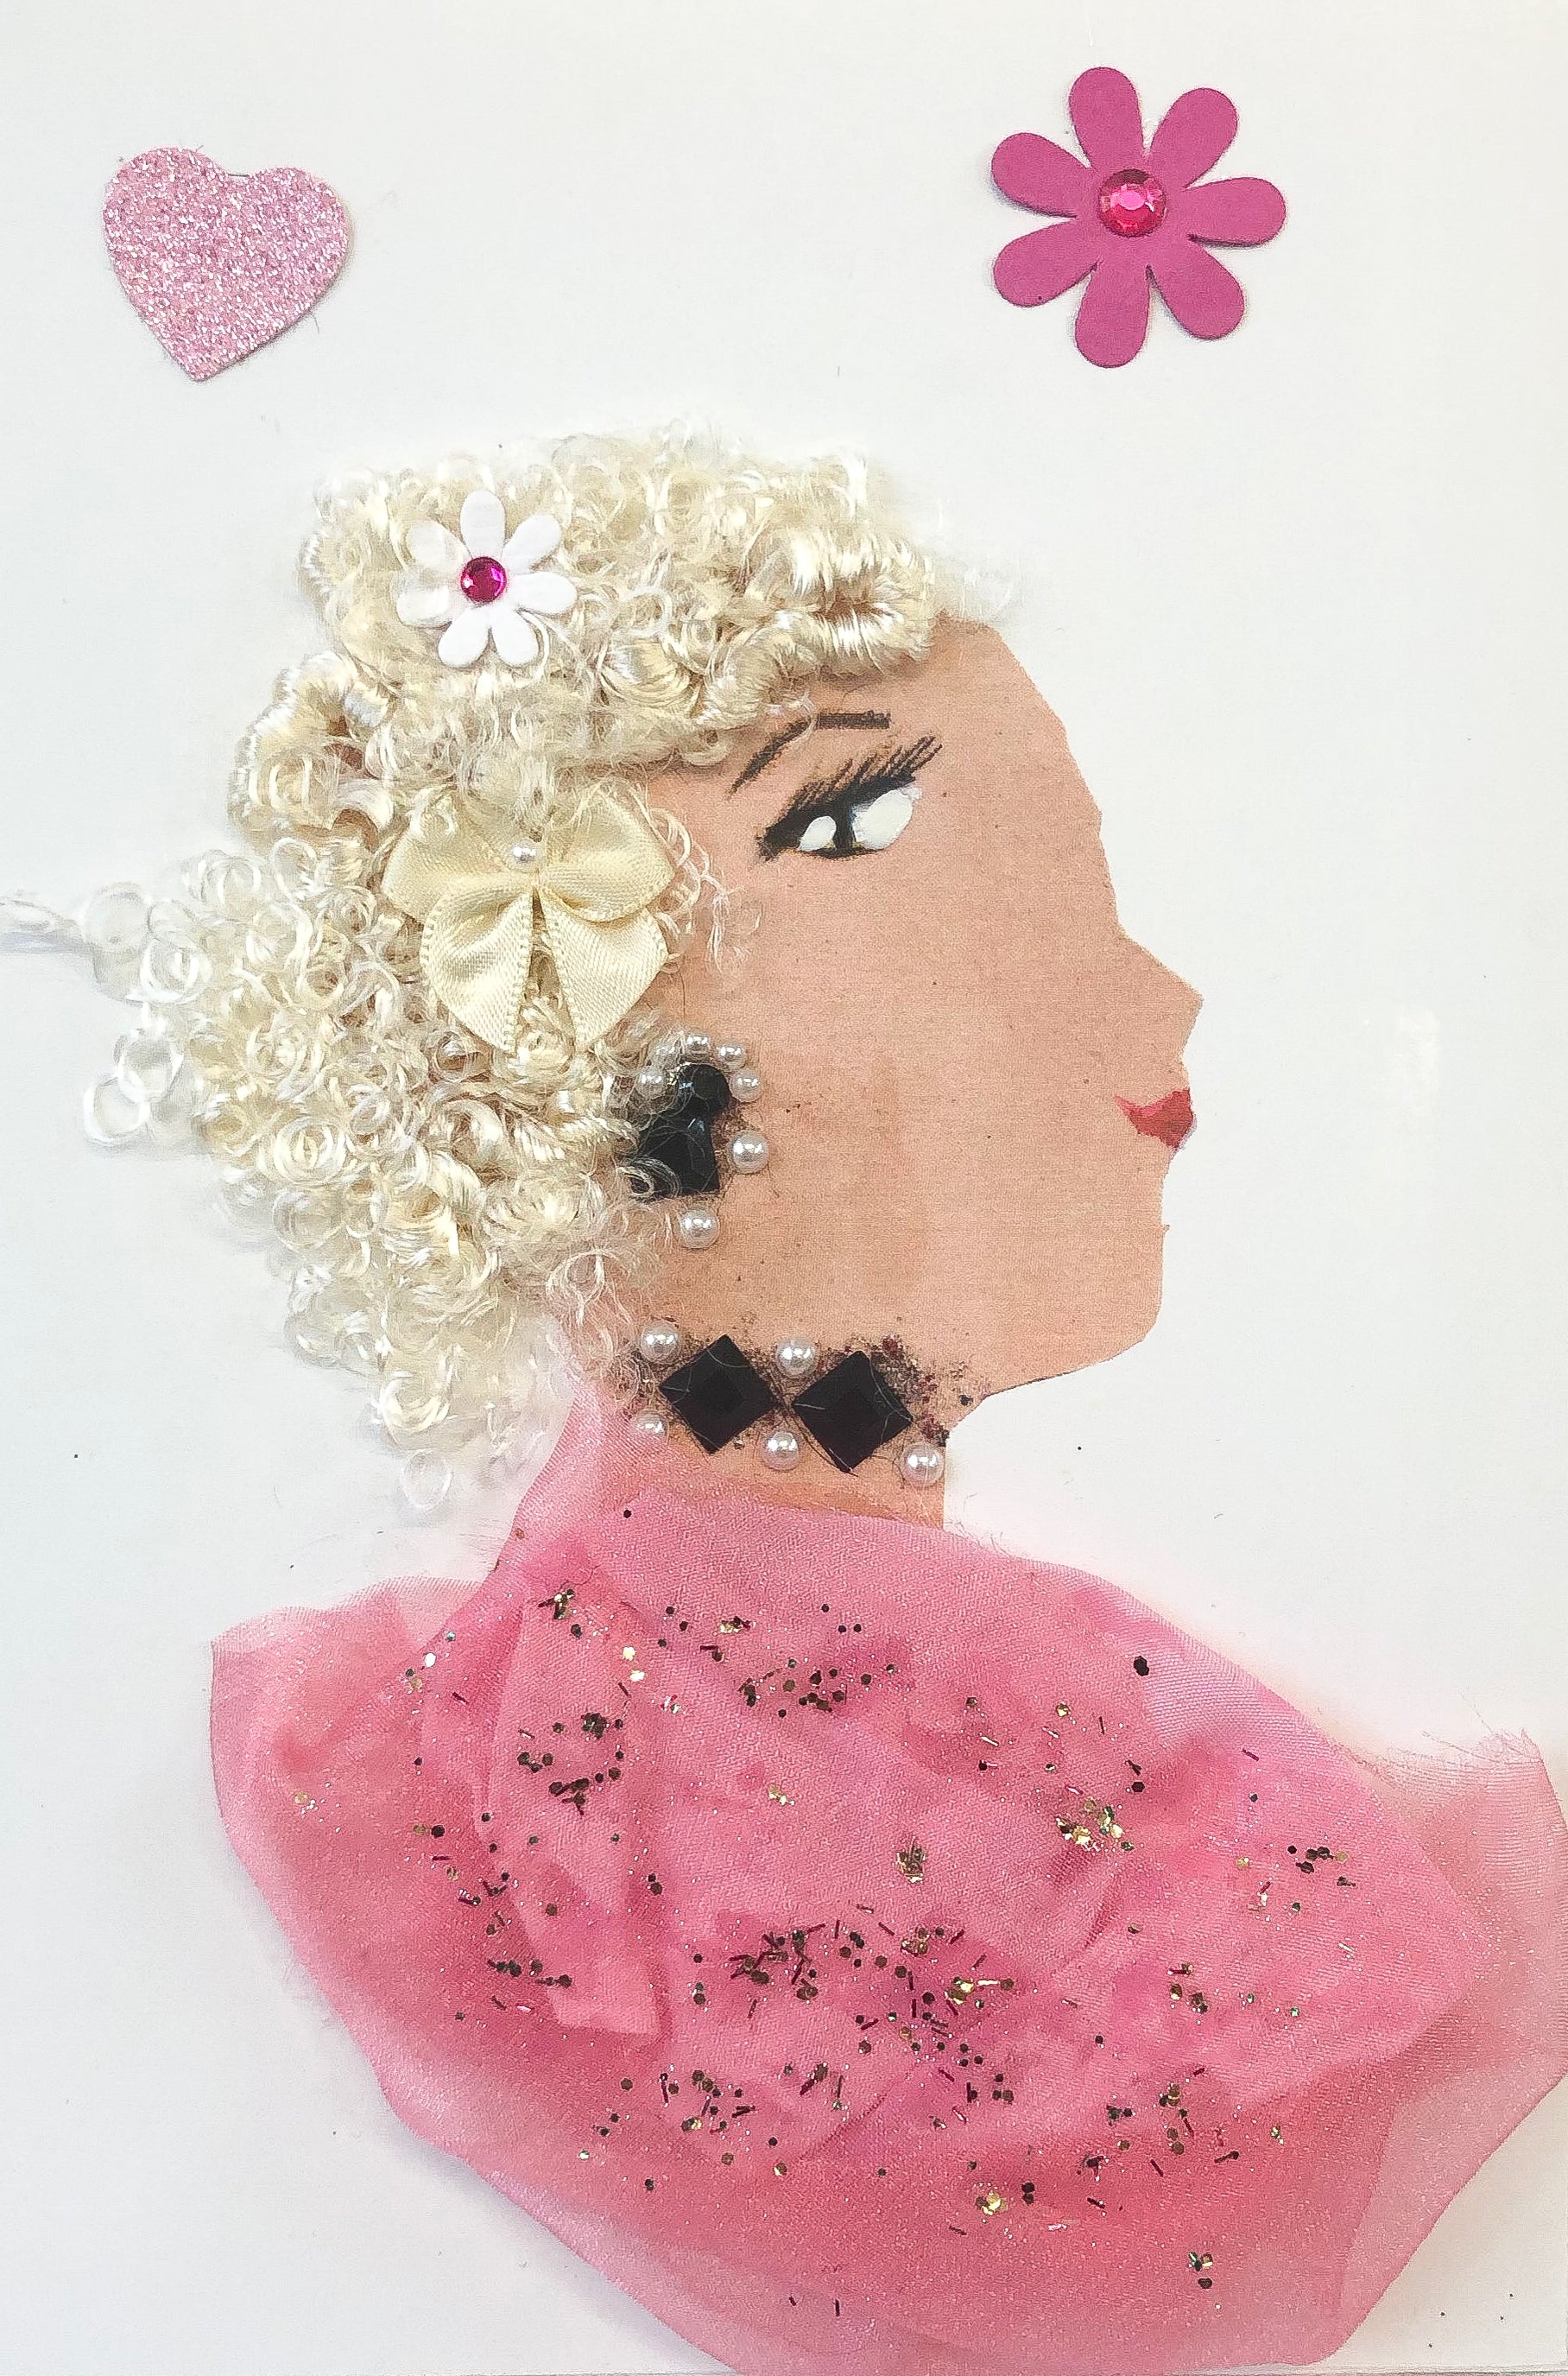 This card has been given the name Pink Pimlico. The card shows a woman wearing a pink shimmery blouse, Black diamond shaped gem jewellery, and she has blonde hair with a tan bow in it. In the top left corner, there is a pink glittery heart, and in the top right corner, there is a pink flower with a pink gem in the center.